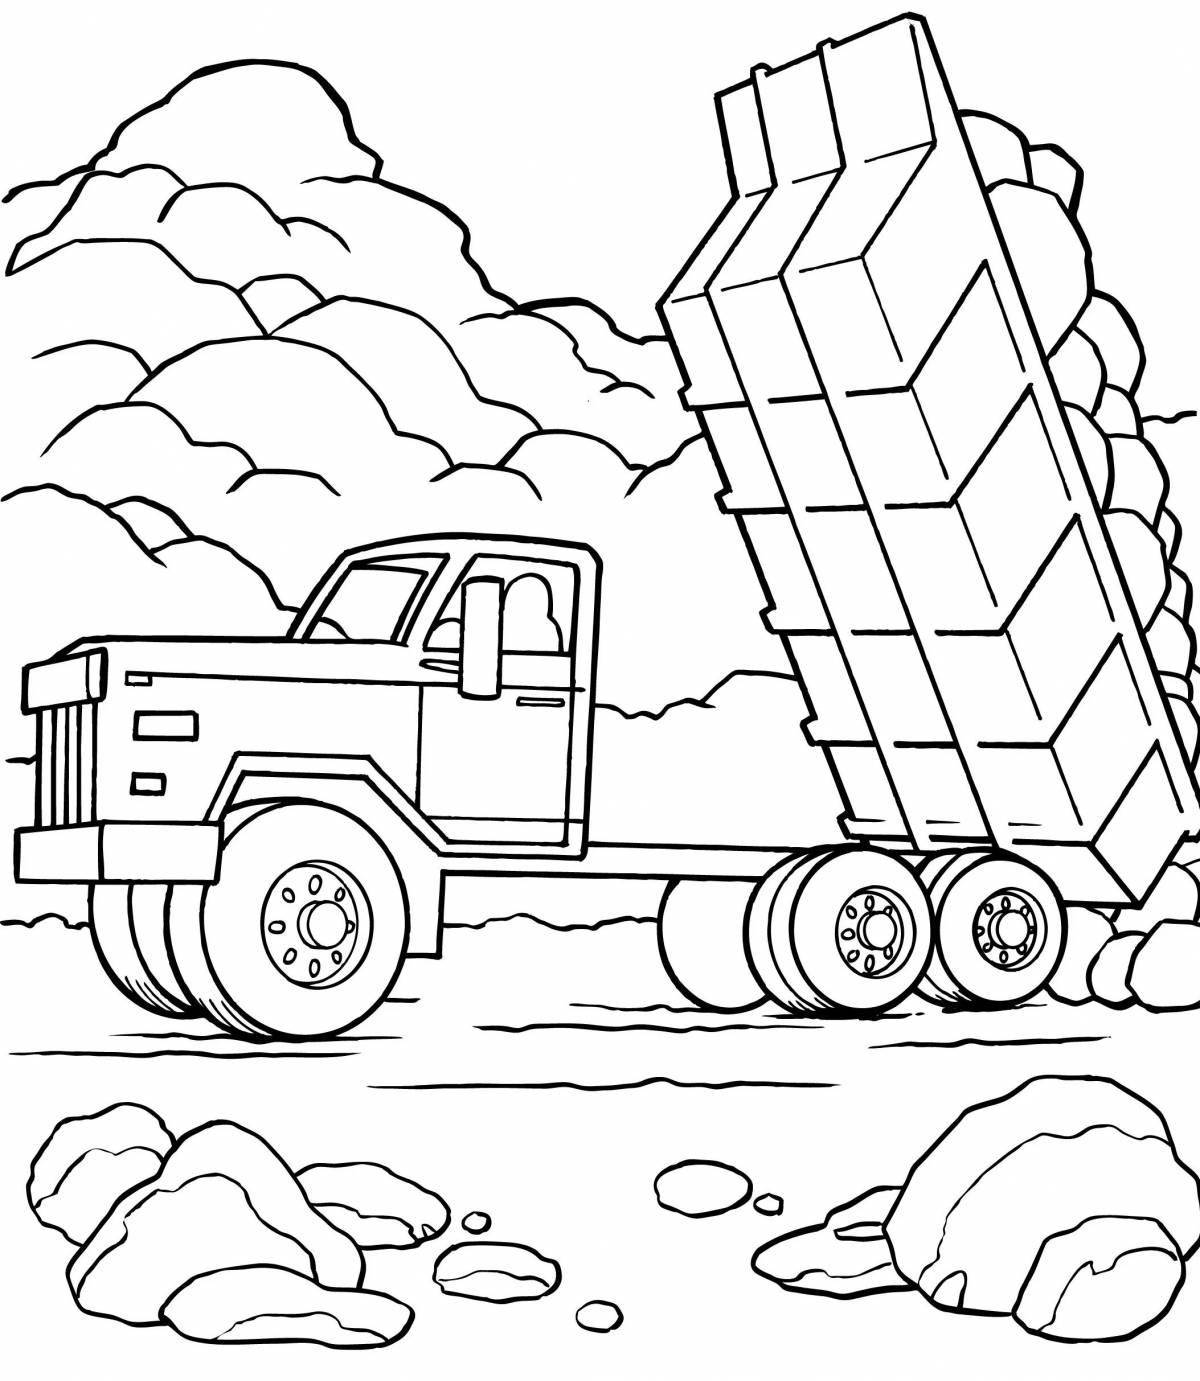 Improved truck coloring page